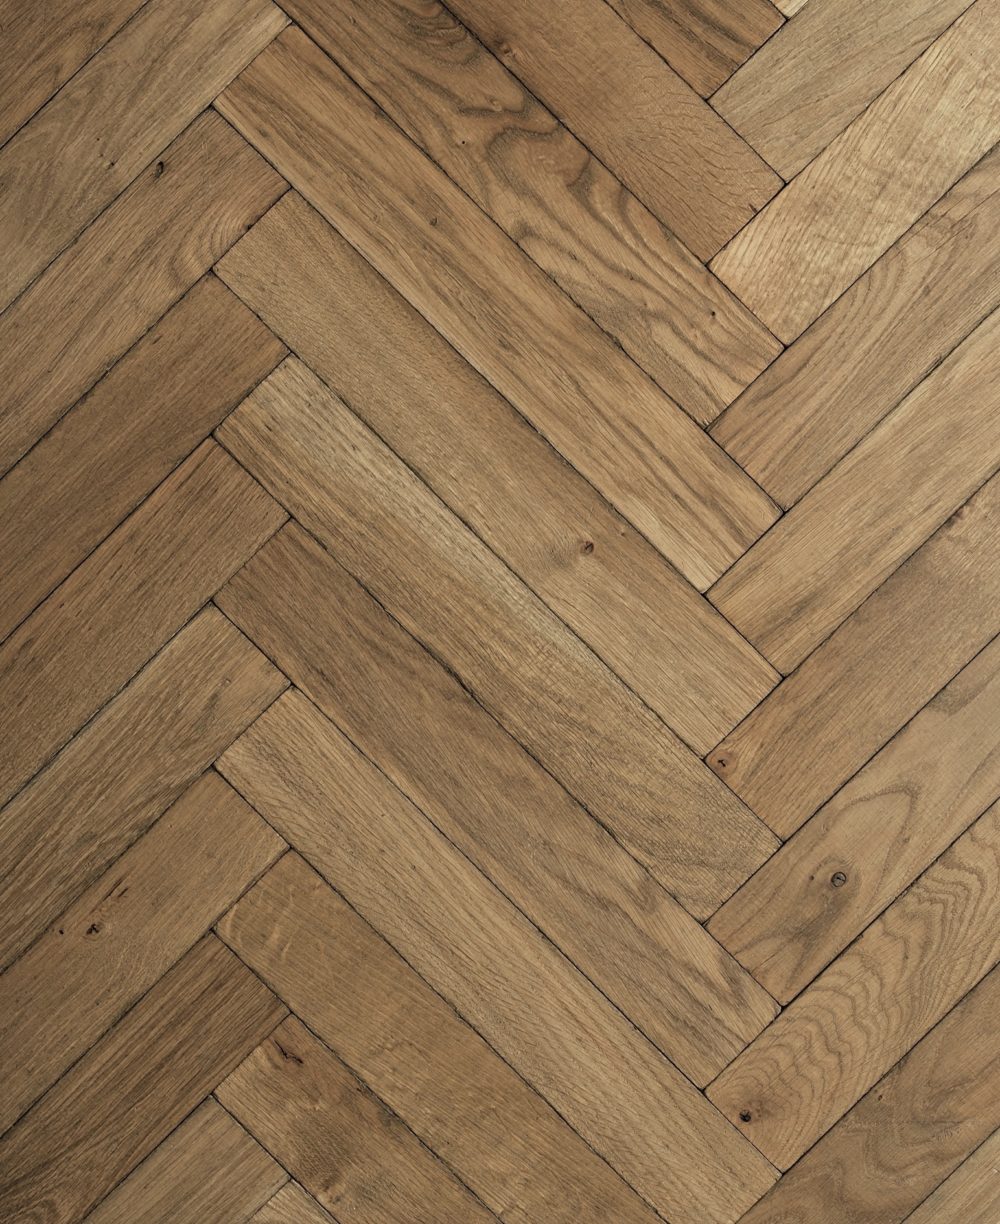 Stripped Oak-Parquet-Solid-Distressed-Rustic-Oiled